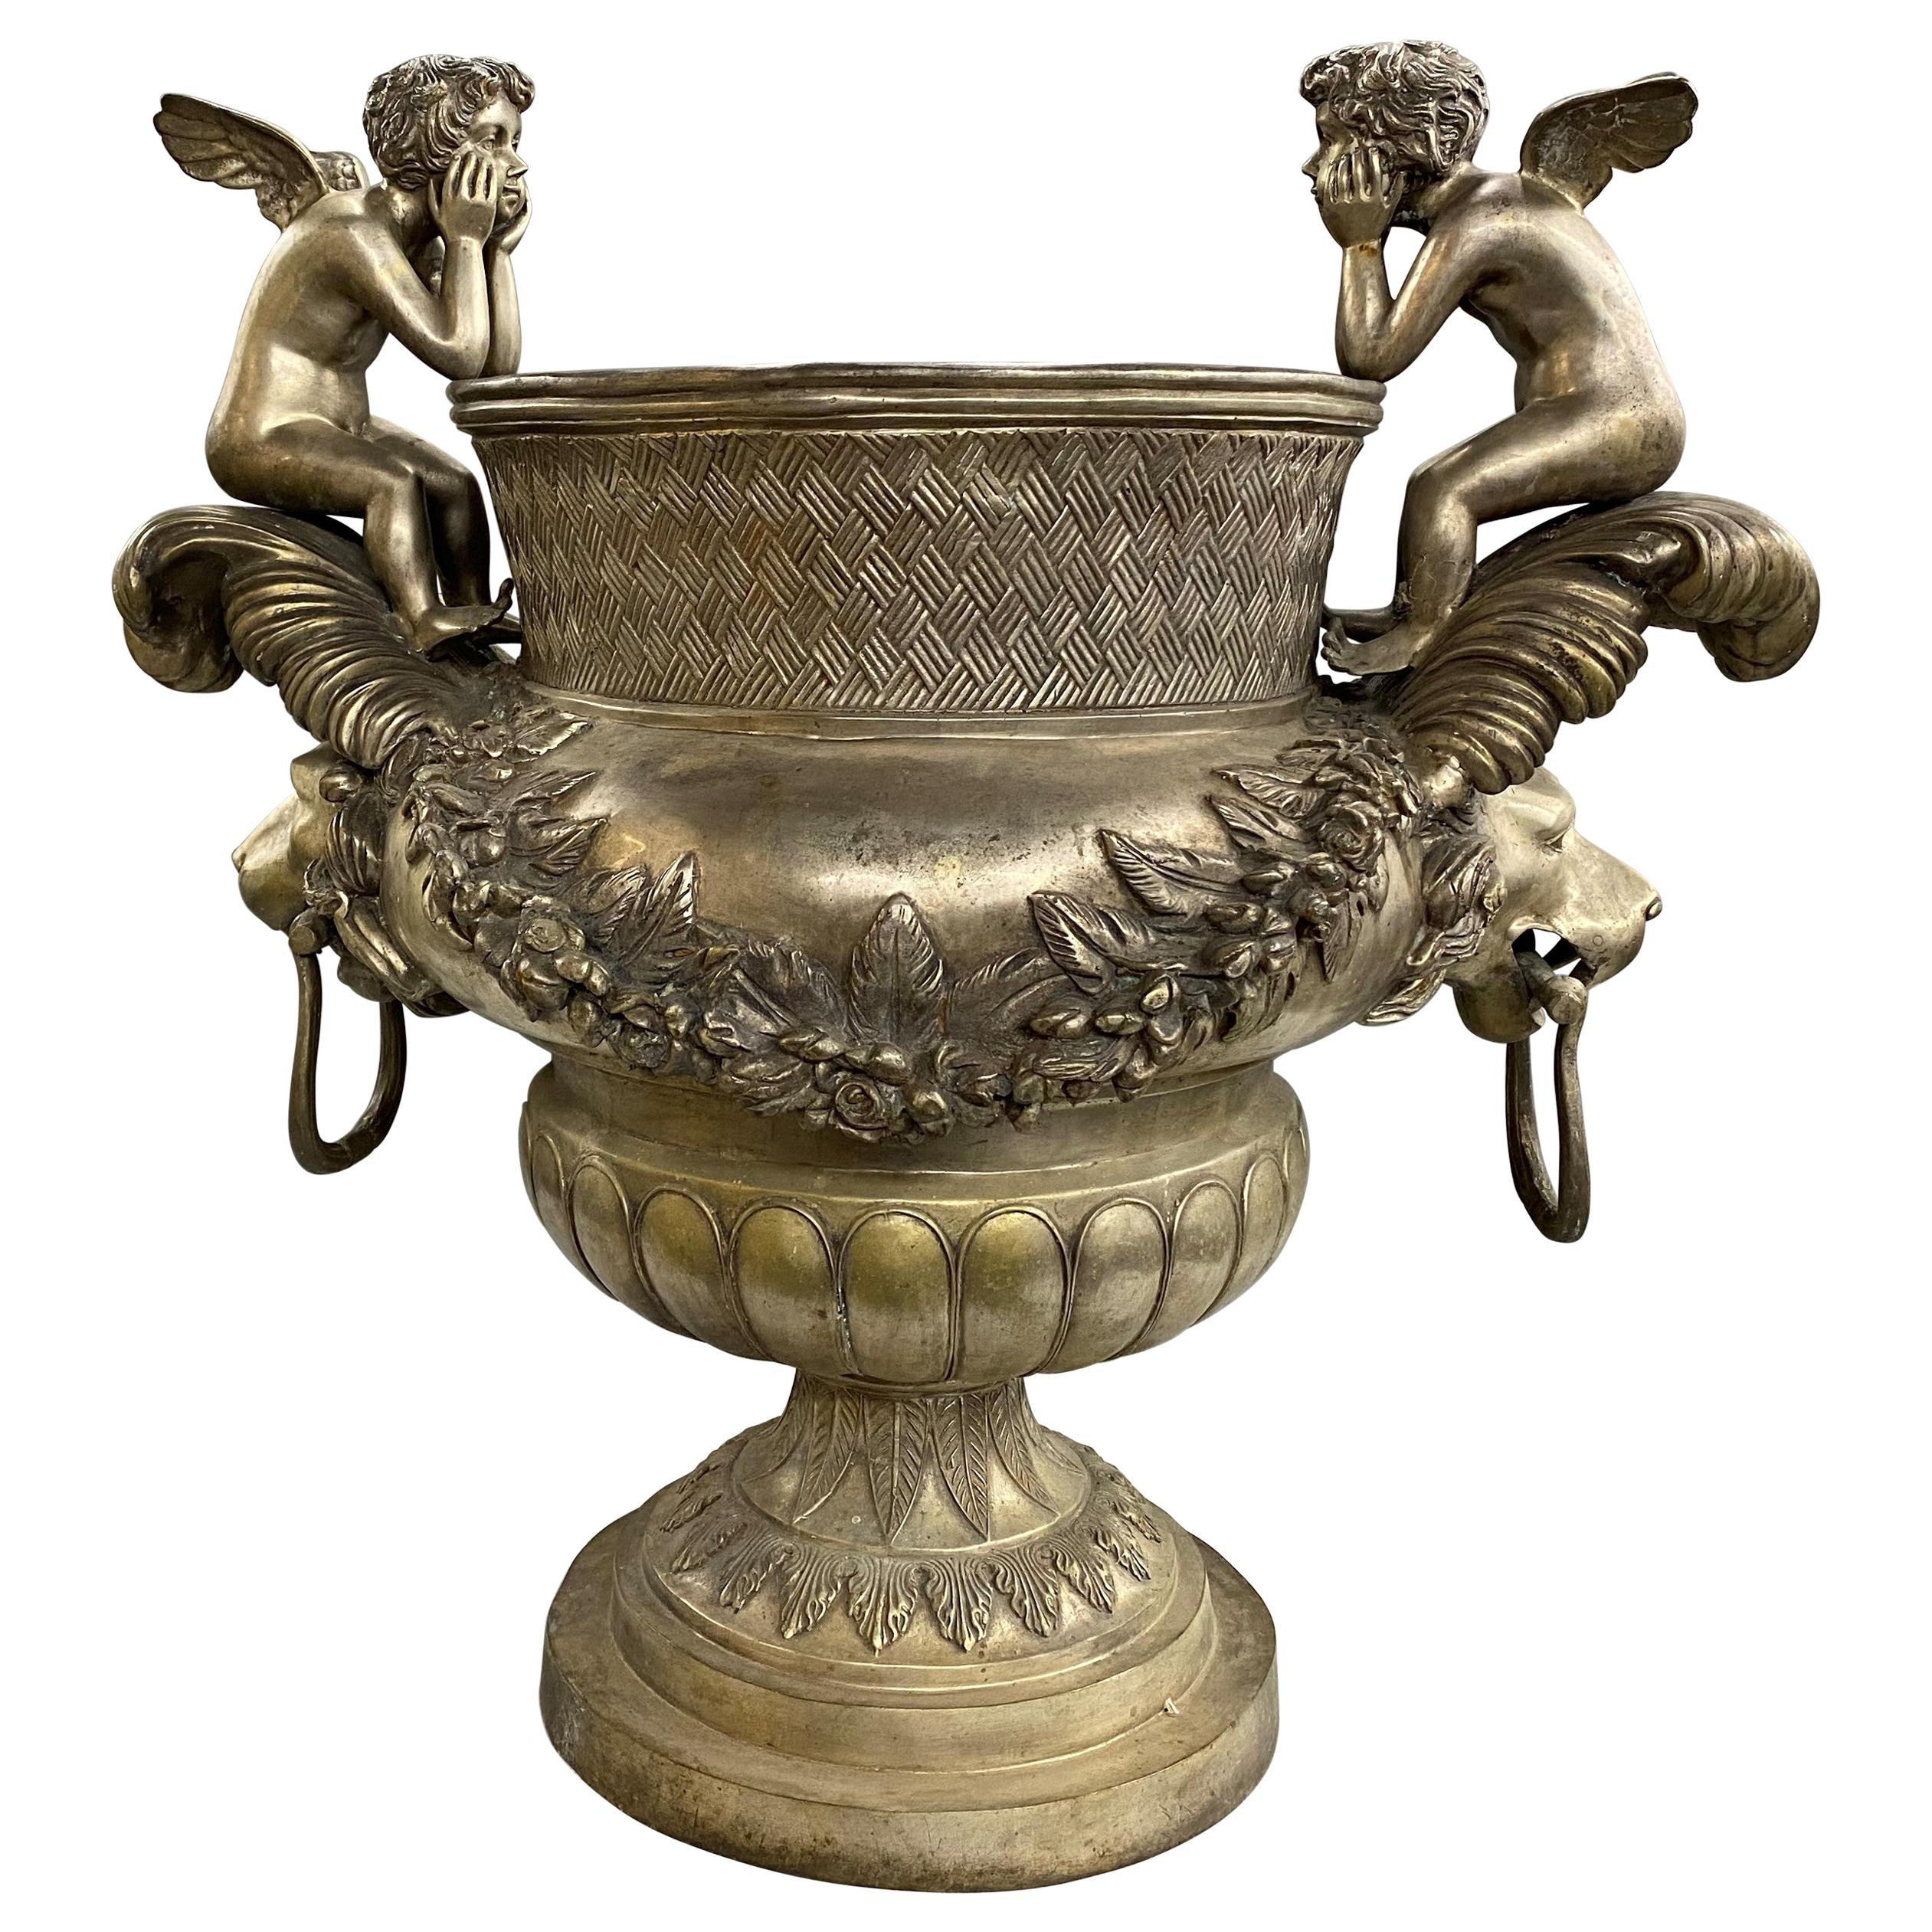 Silvered Metal Handled Garden Urn with Lion Heads and Winged Putti